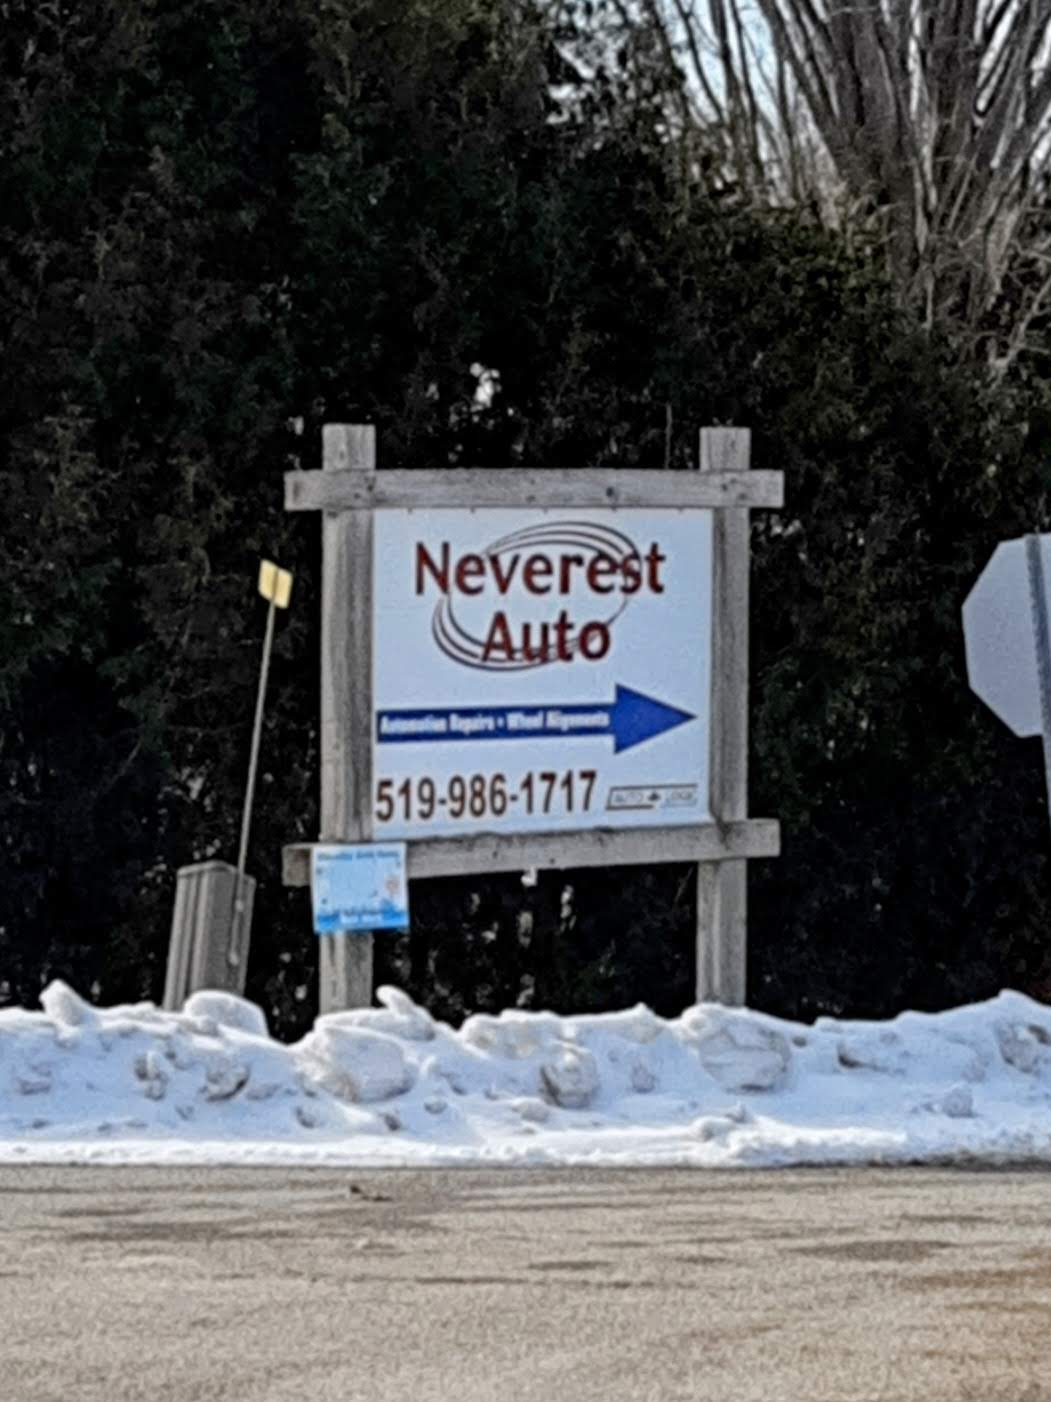 Neverest Auto & Svc 76 Fords Dr, Markdale Ontario N0C 1H0